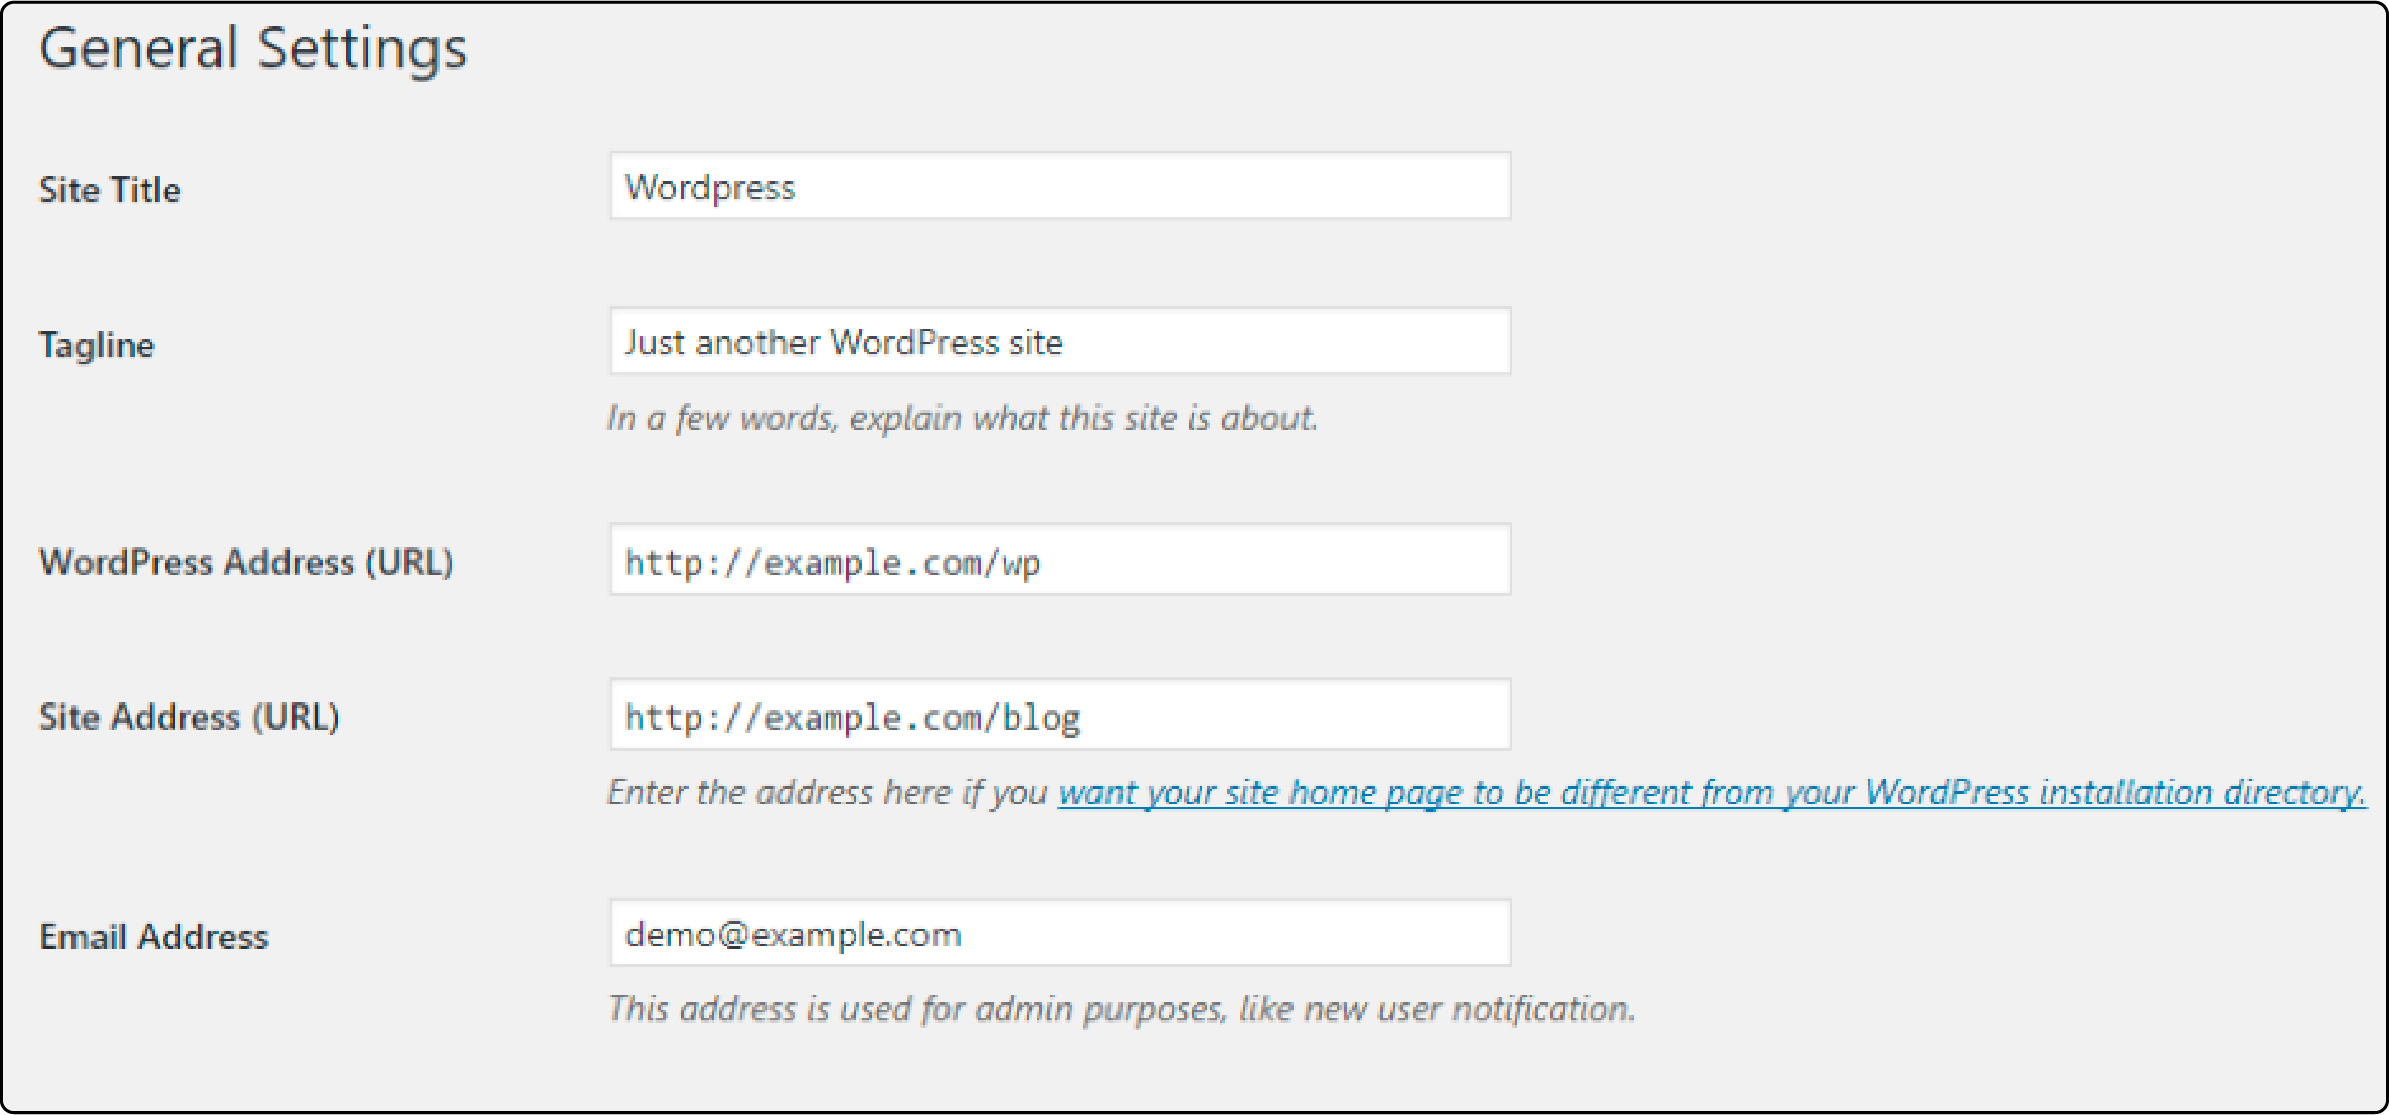 WordPress general settings overview for Magento blog integration.